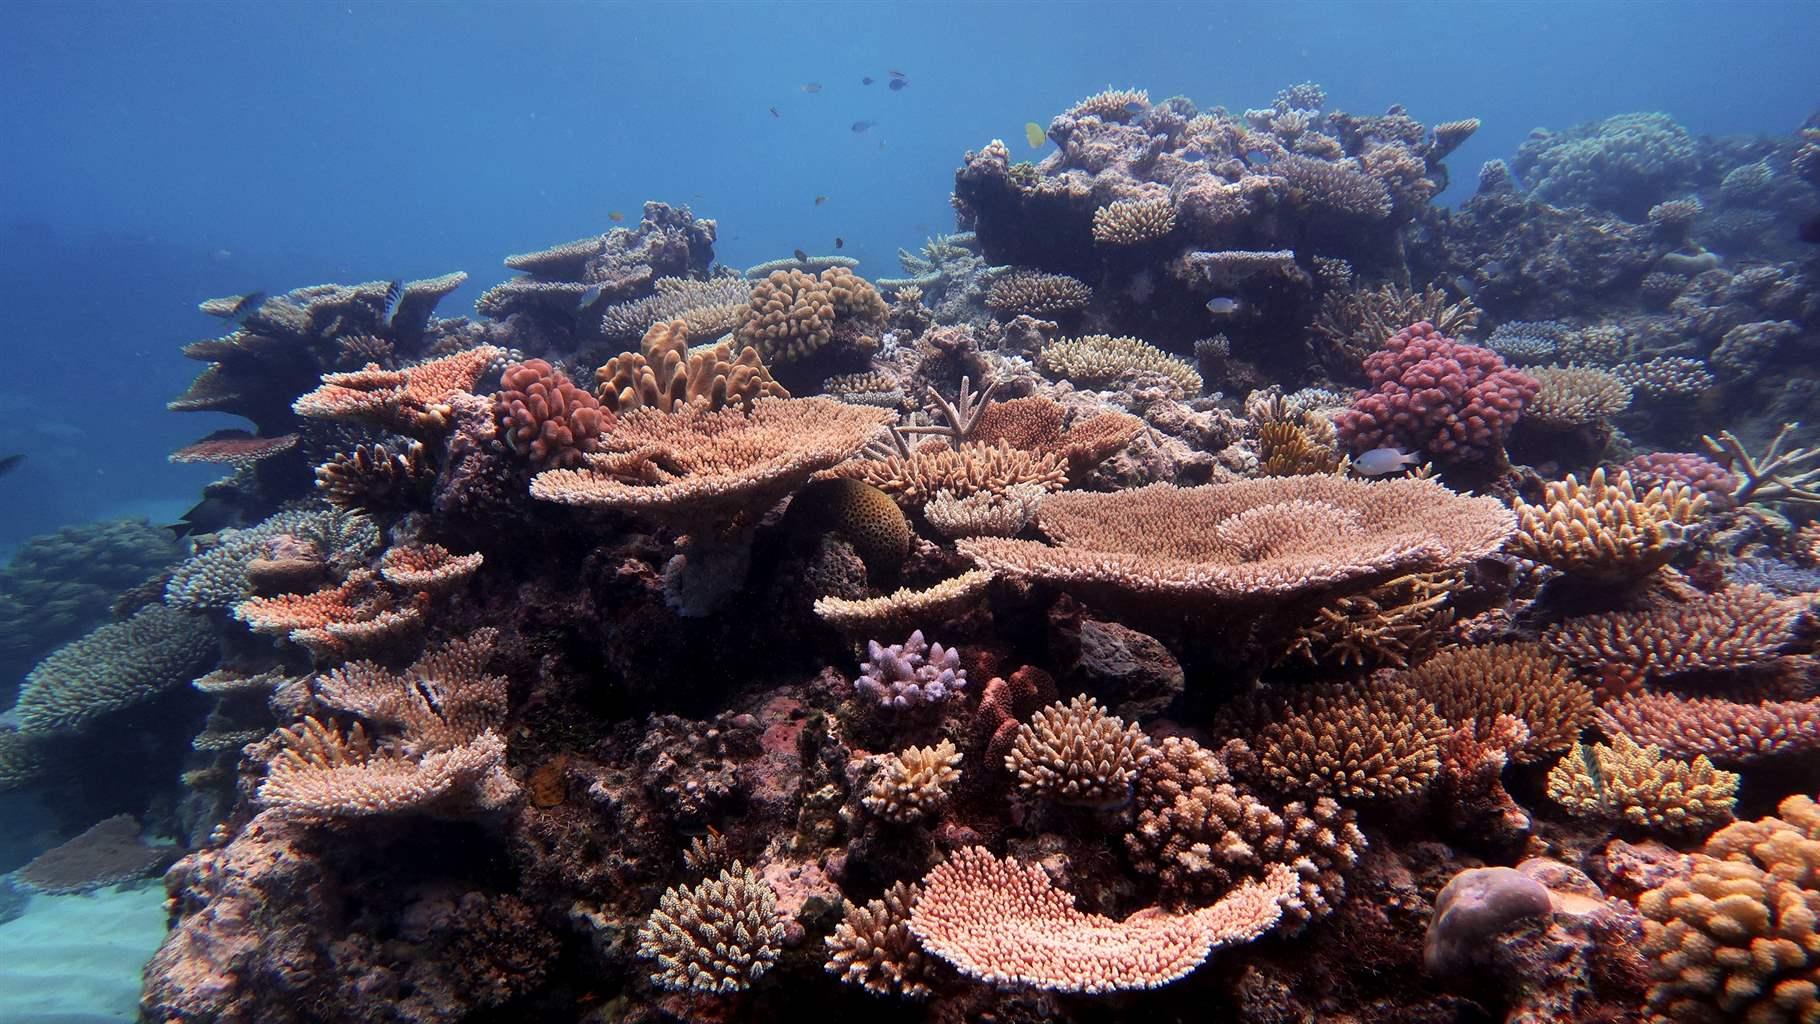 A multicolored coral reef with variegated shapes appears in the foreground in clear blue waters.